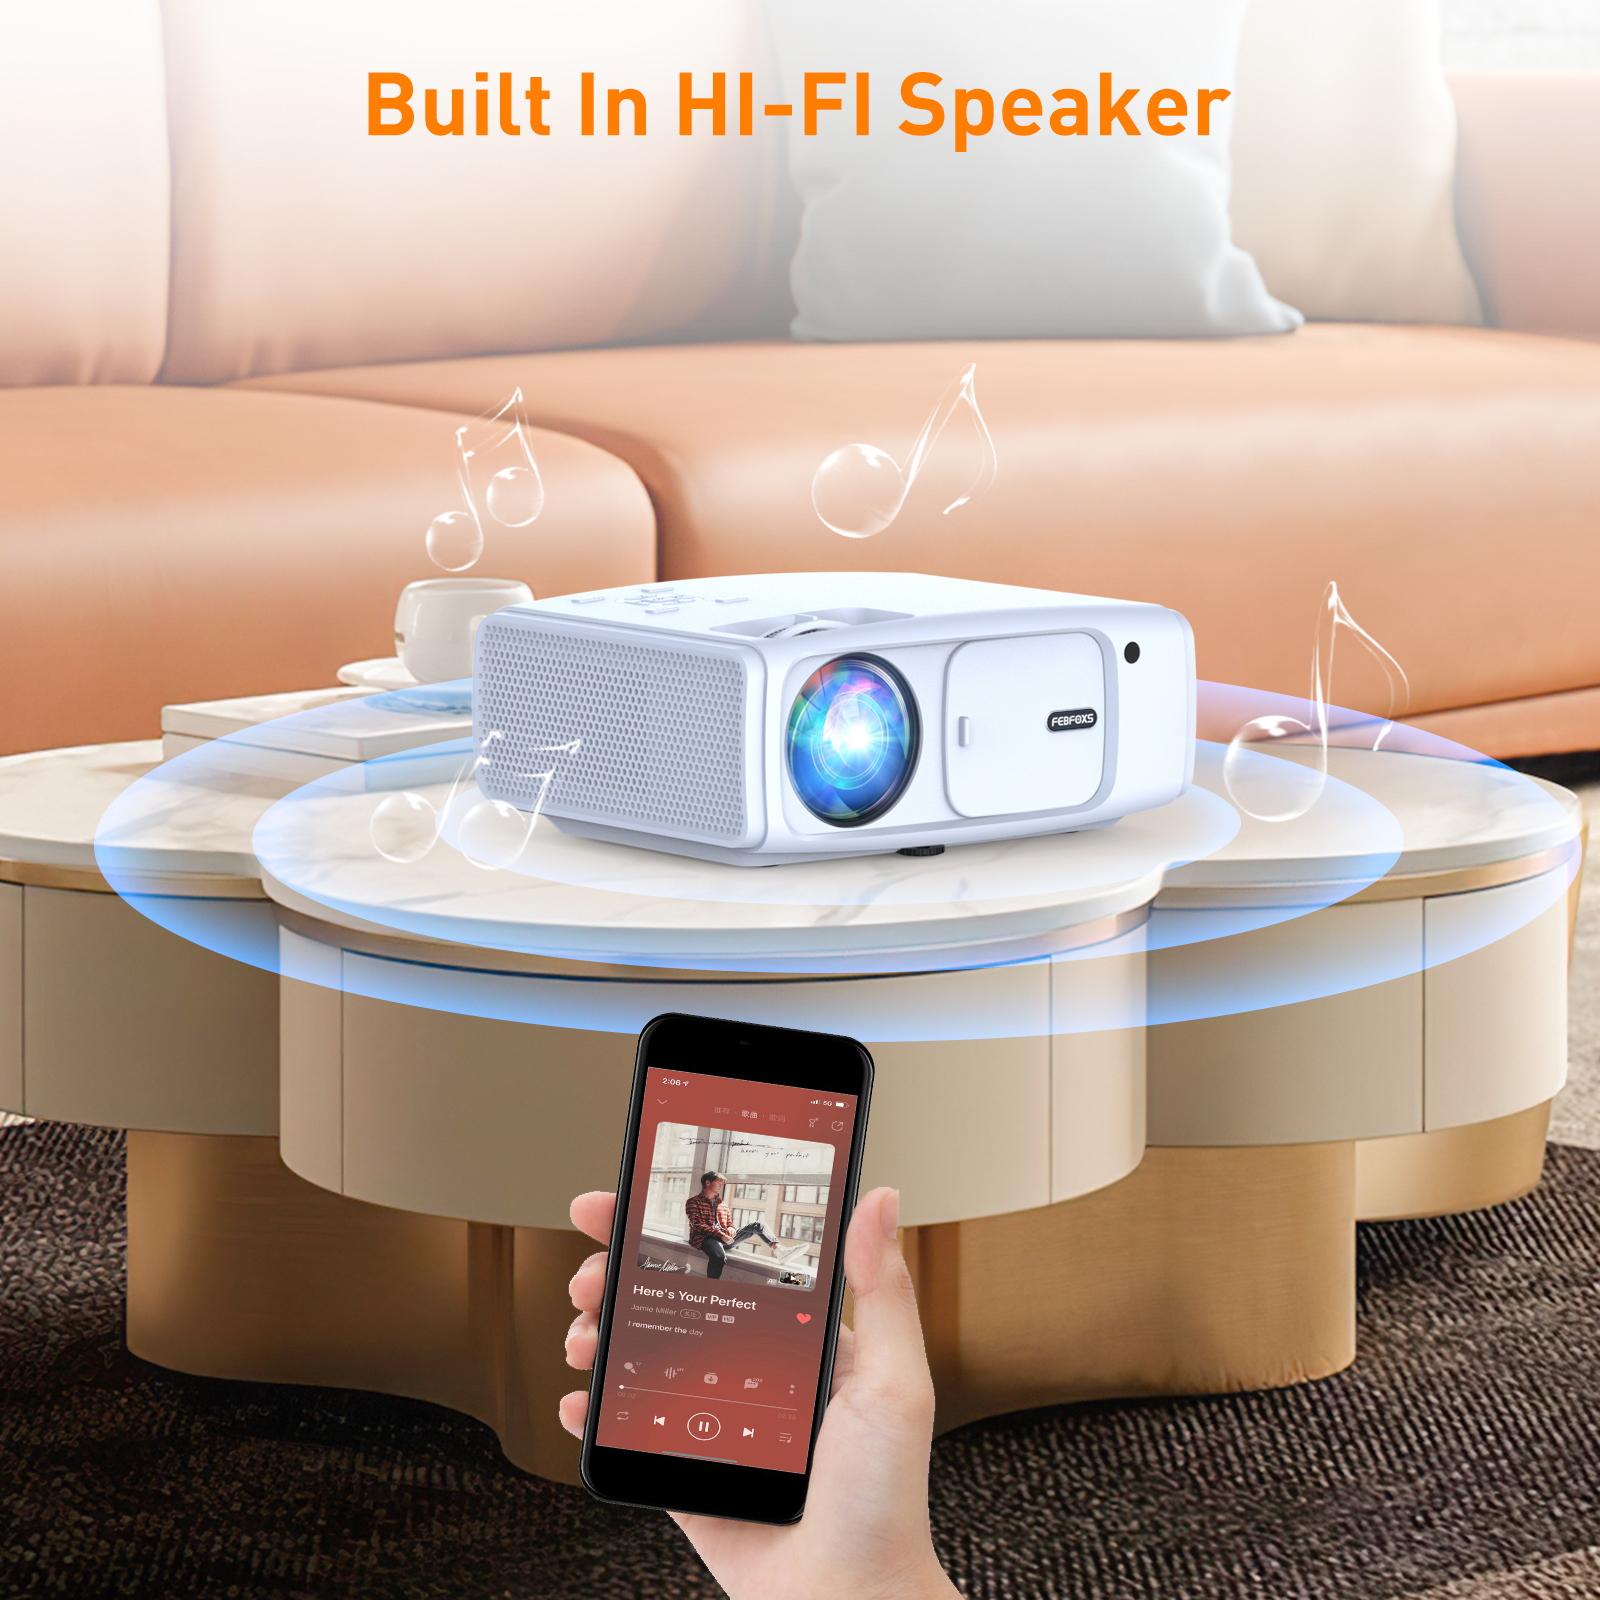 [Big Sale]Native 1080P Mini WiFi Projector for Smart Phone,Wireless Bluetooth Projector with Speakers,Mini Indoor Outdoor Movie Projector with Digital - 4